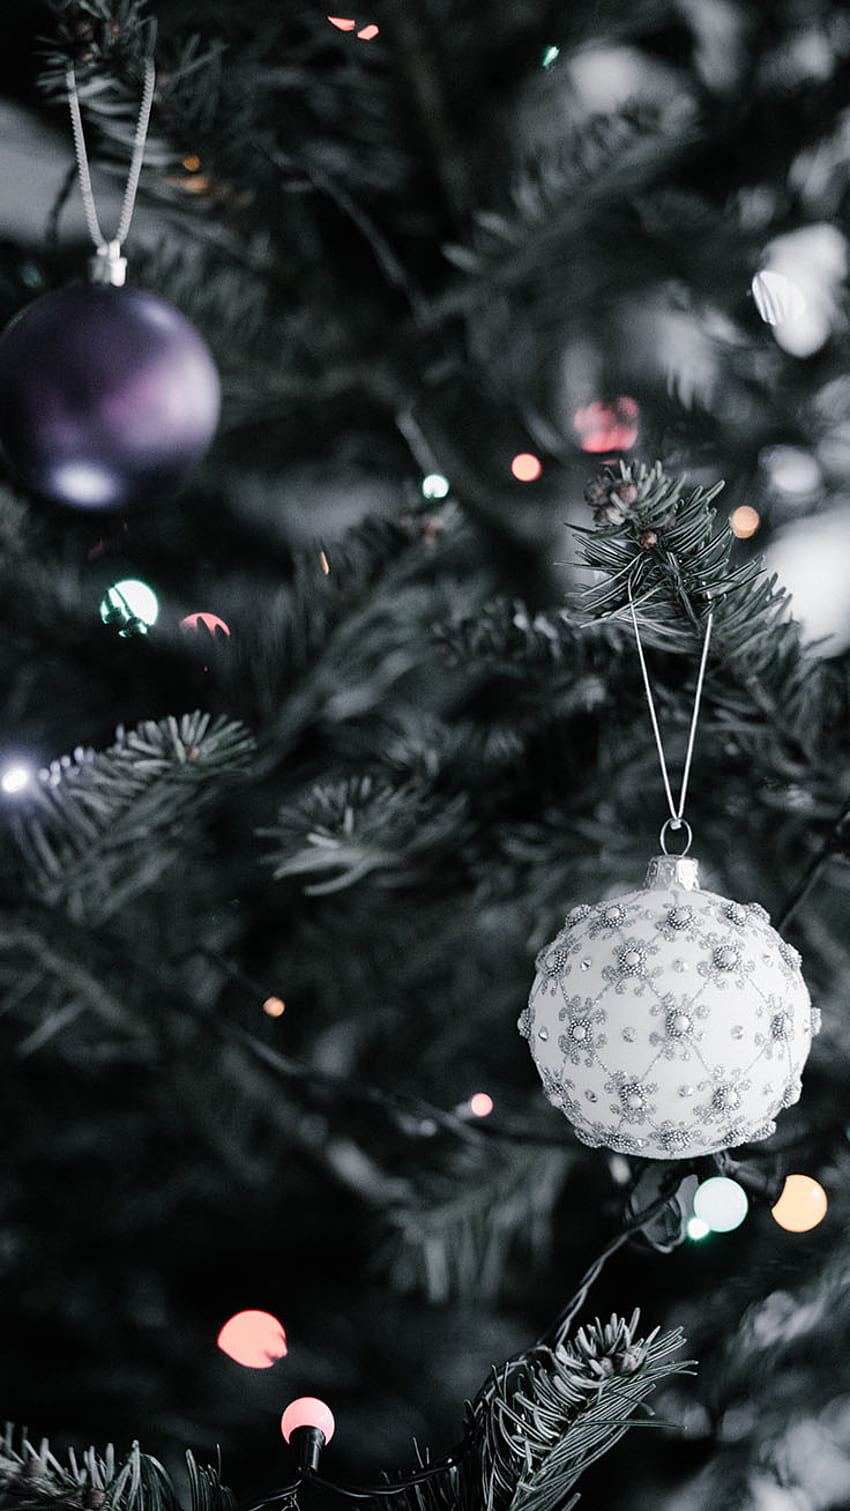 A close up of a Christmas tree with a white ornament hanging from it. - White Christmas